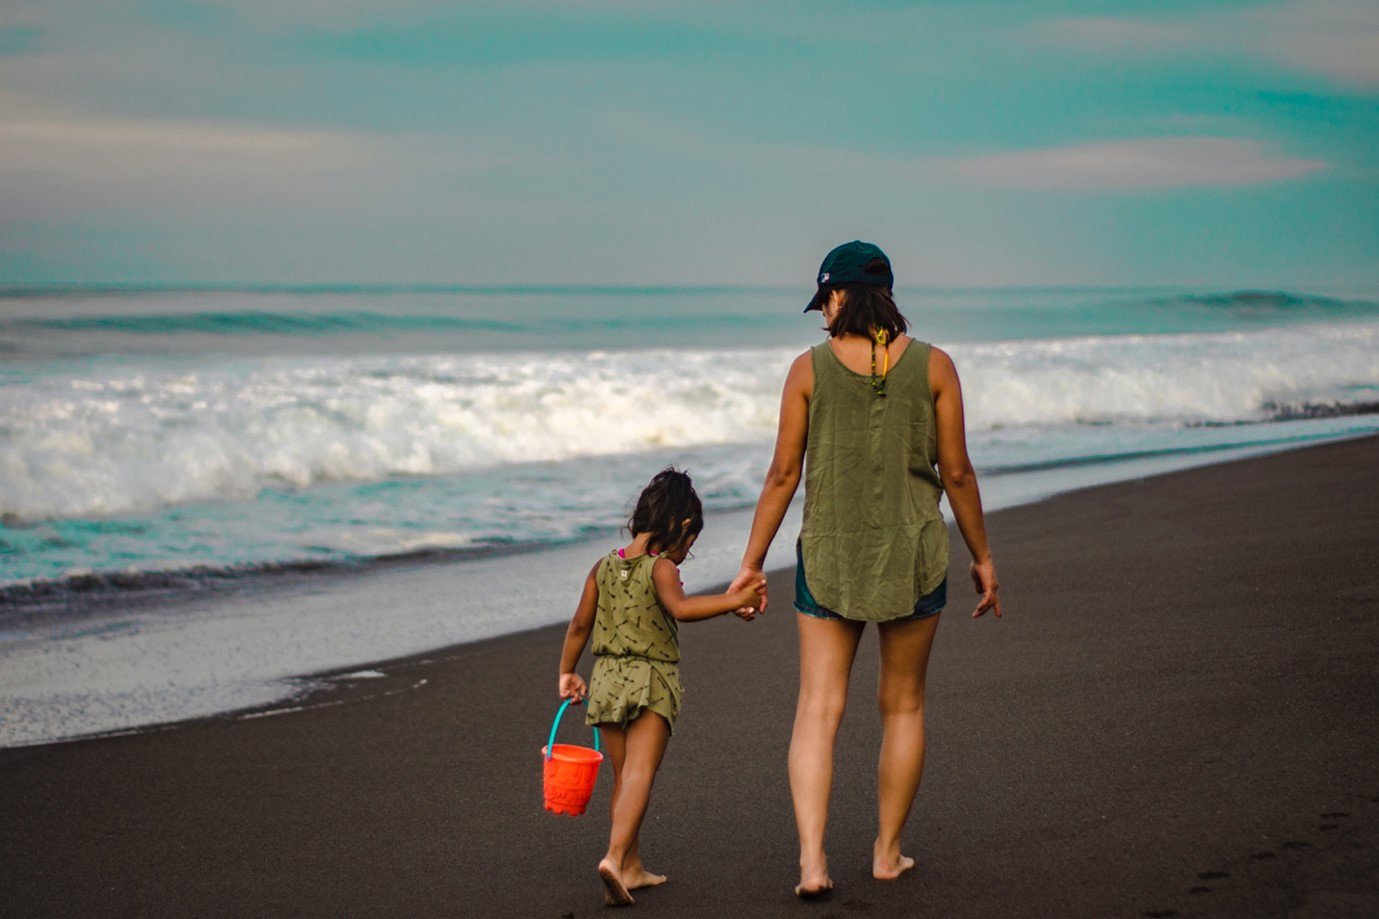 Mother and daughter walking on beach